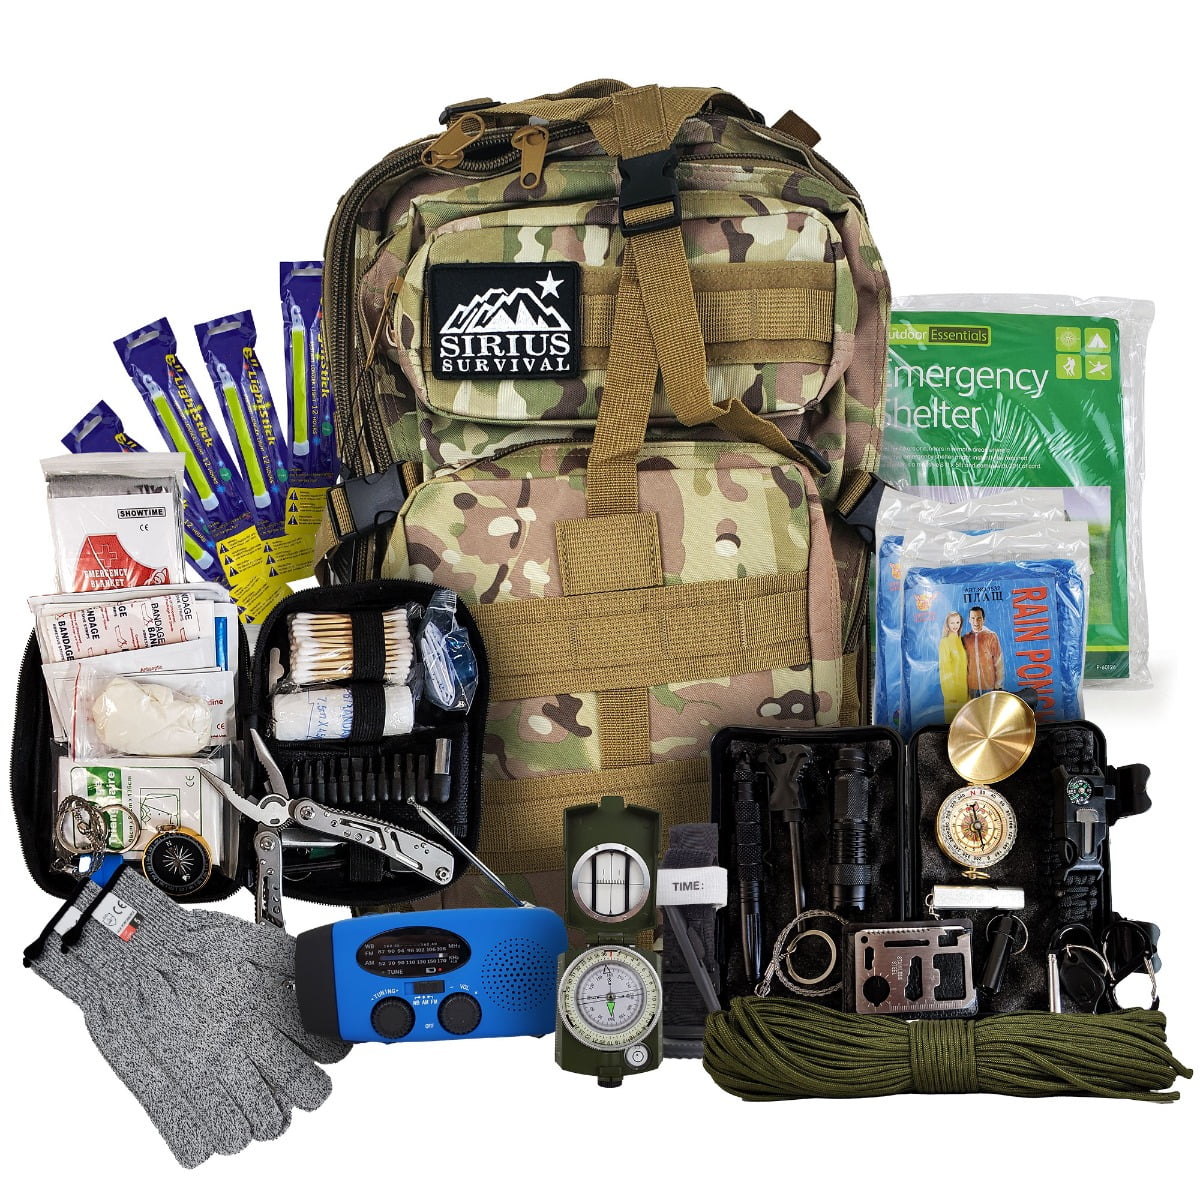  Pre-Packed Emergency Survival Kit/Bug Out Bag for 2 - Over 150  Total Pieces of Disaster Preparedness Supplies for Hurricanes, Floods,  Earth Quakes & Other Disasters (Black) : Sports & Outdoors